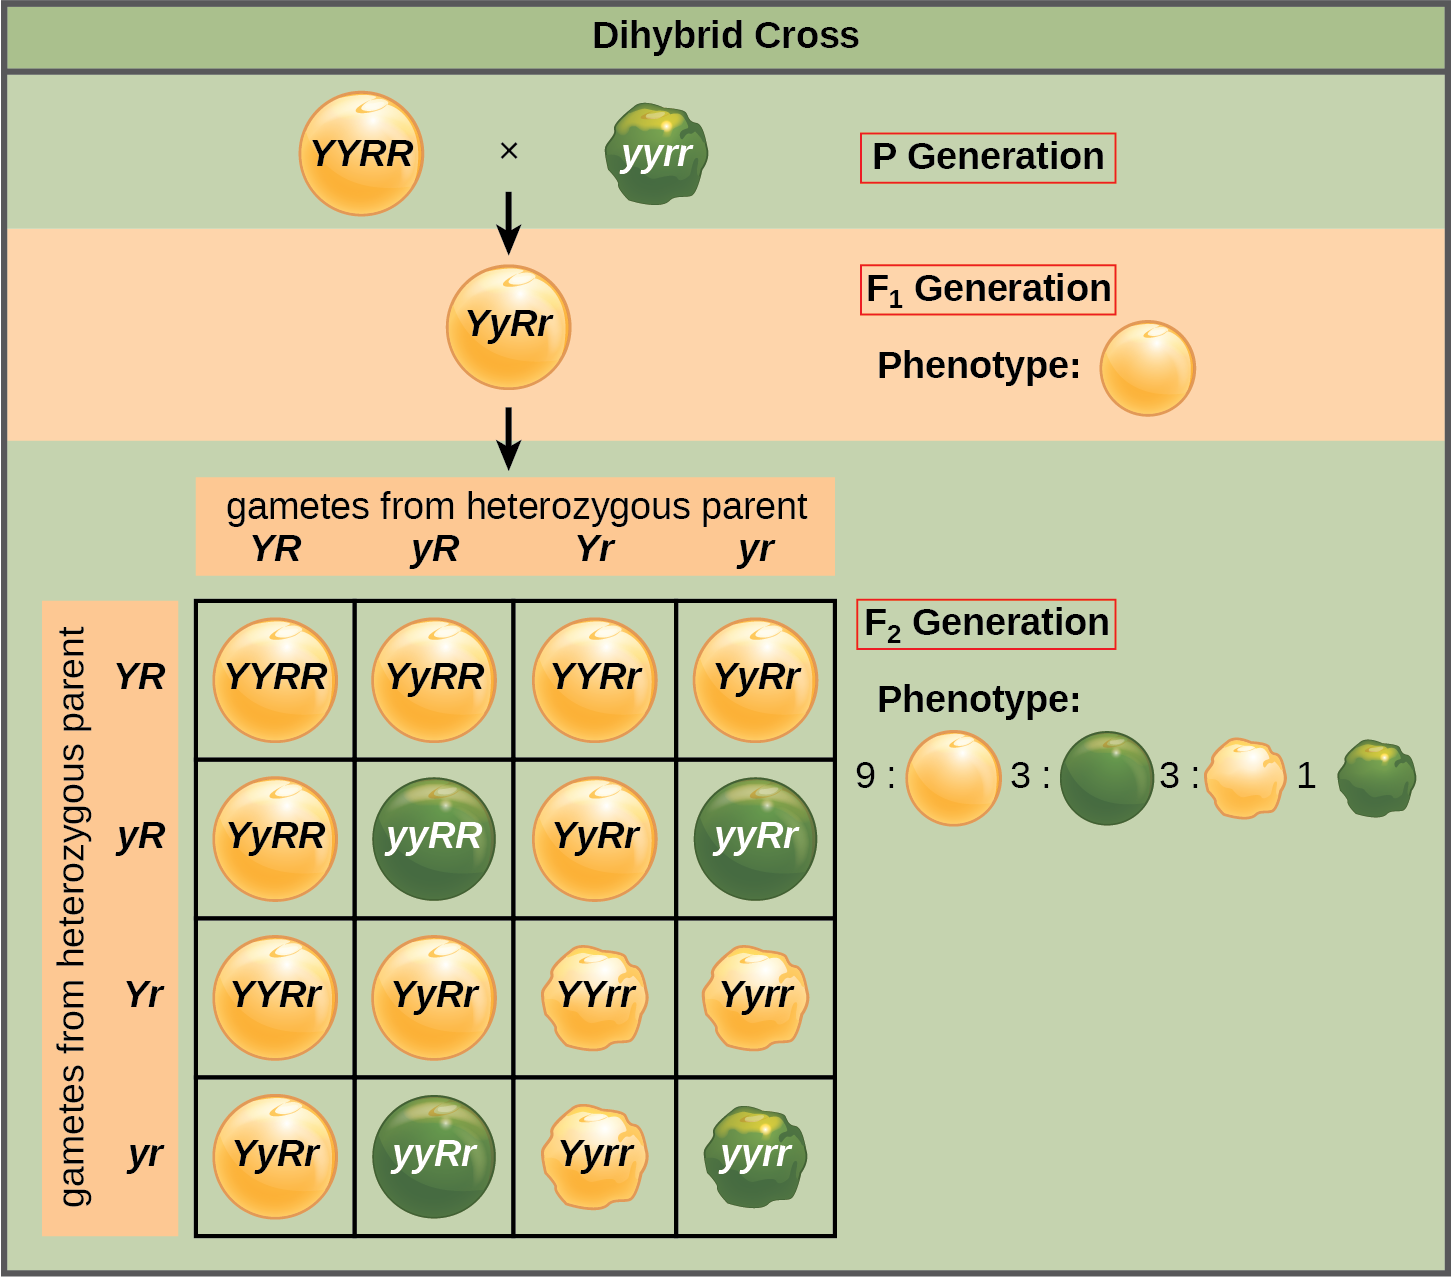 This illustration shows a dihybrid cross between pea plants. In the P generation, a plant that has the homozygous dominant phenotype of round, yellow peas is crossed with a plant with the homozygous recessive phenotype of wrinkled, green peas. The resulting F_{1} offspring have a heterozygous genotype and round, yellow peas. Self-pollination of the F_{1} generation results in F_{2} offspring with a phenotypic ratio of 9:3:3:1 for yellow round, green round, yellow wrinkled and green wrinkled peas, respectively.